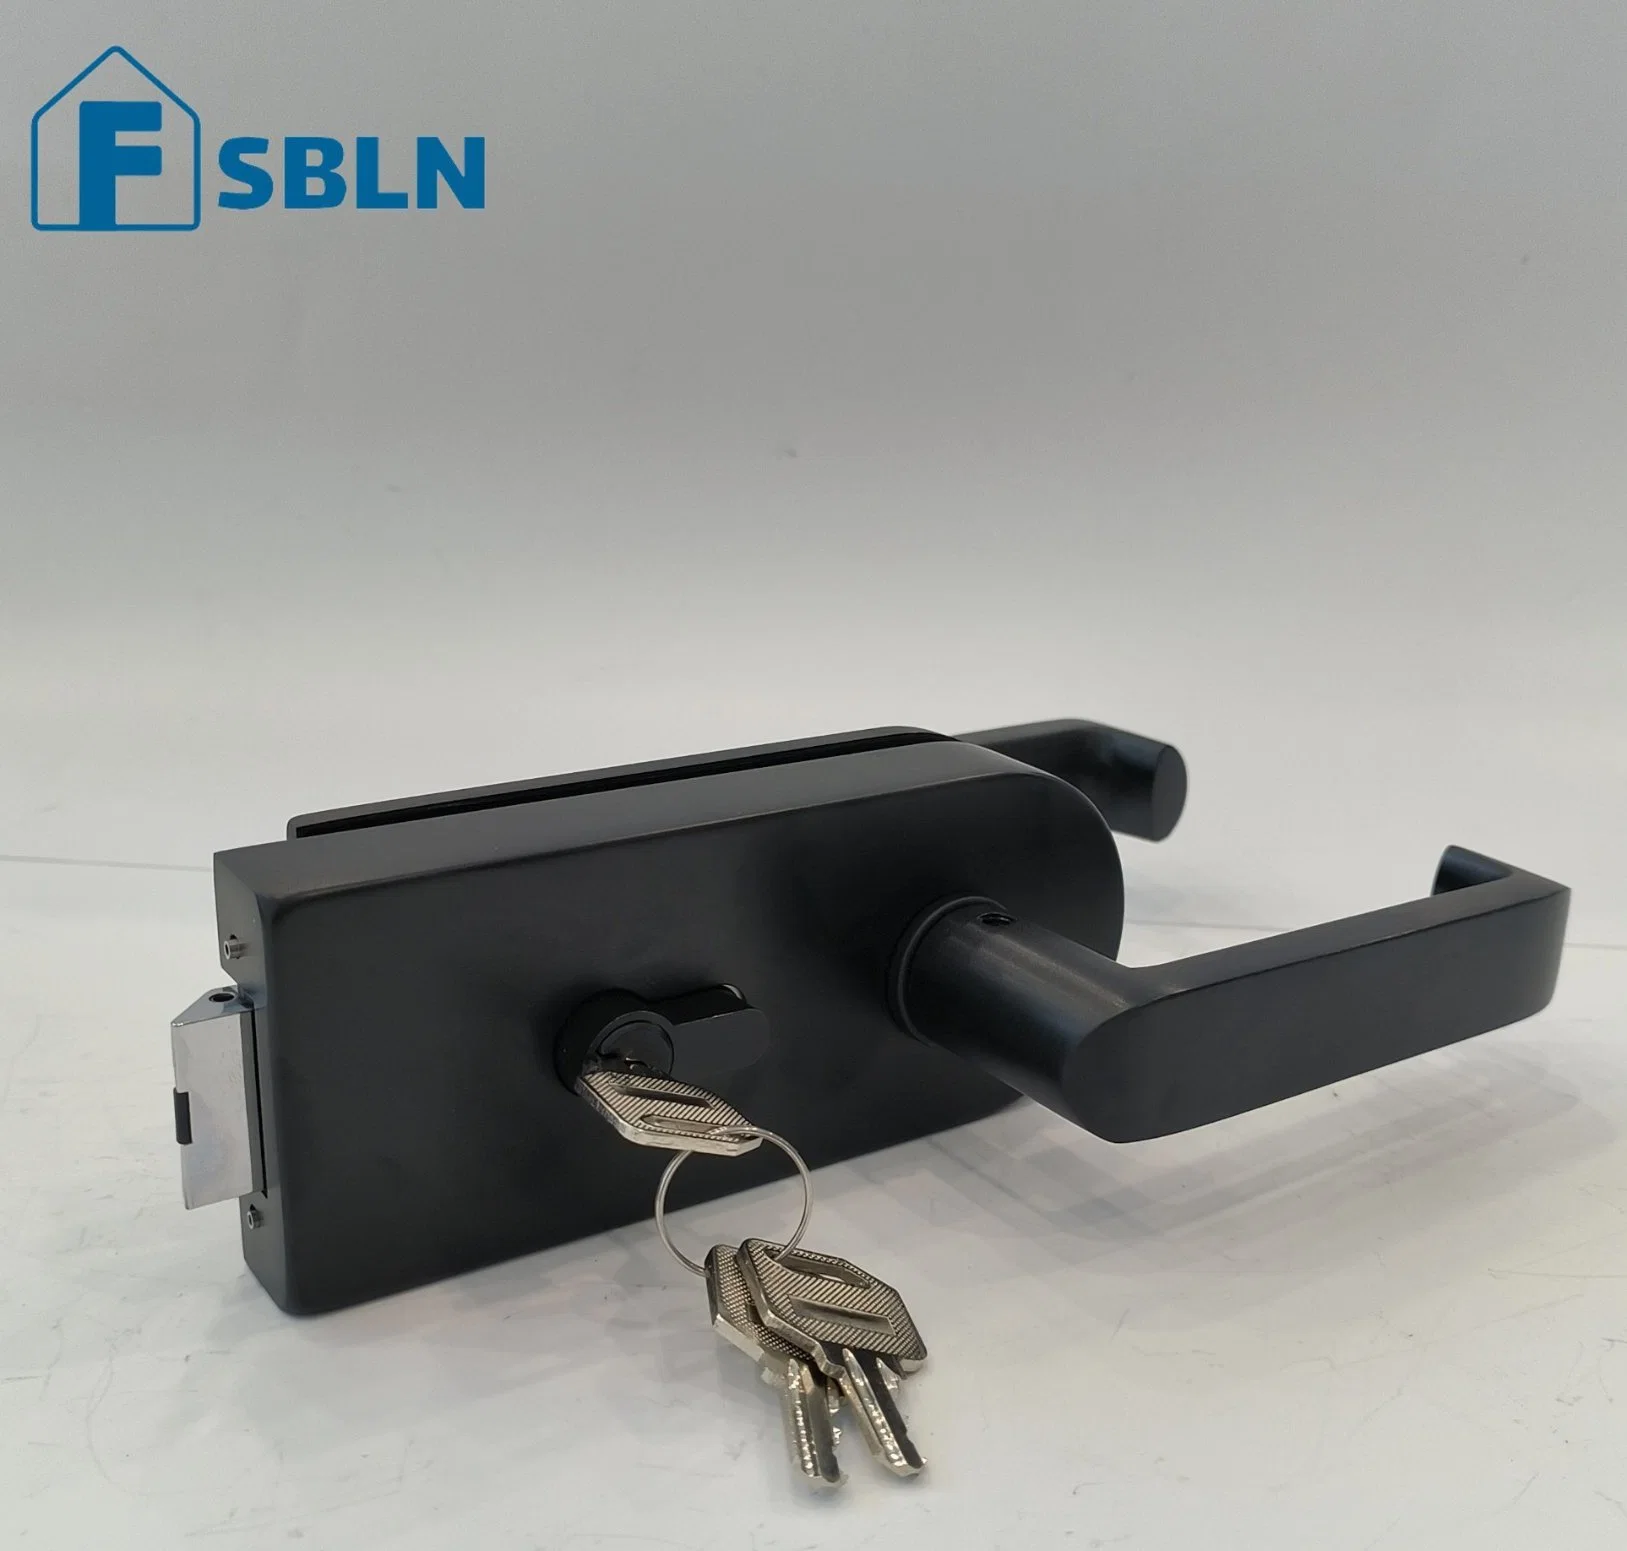 Zinc Alloy Keylock Office Toughness Glass Door Lock with Handle with Cylinder